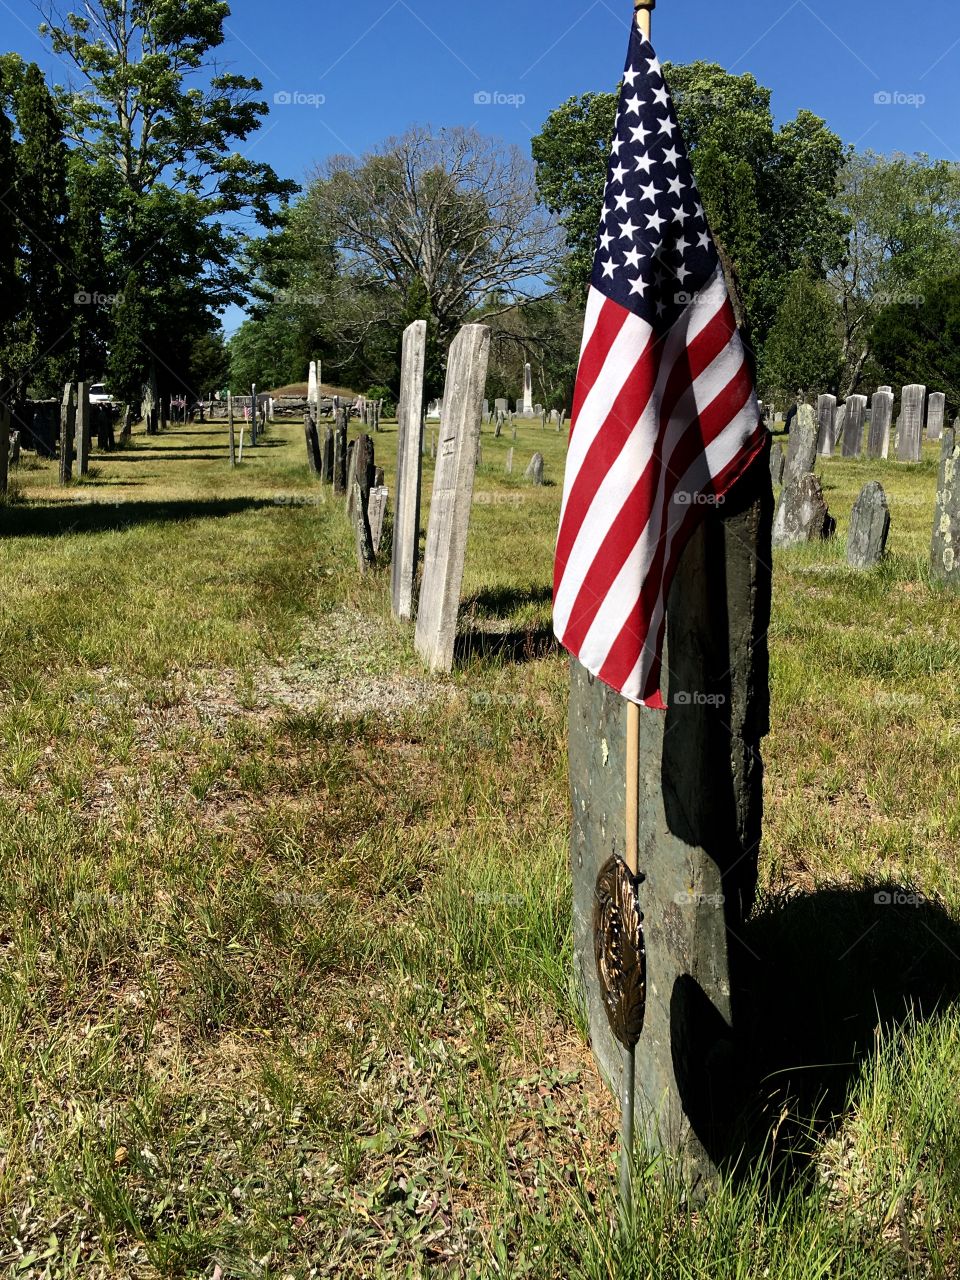 Civil War gravestones lined up with an American 🇺🇸Flag marking just 1 of the many.